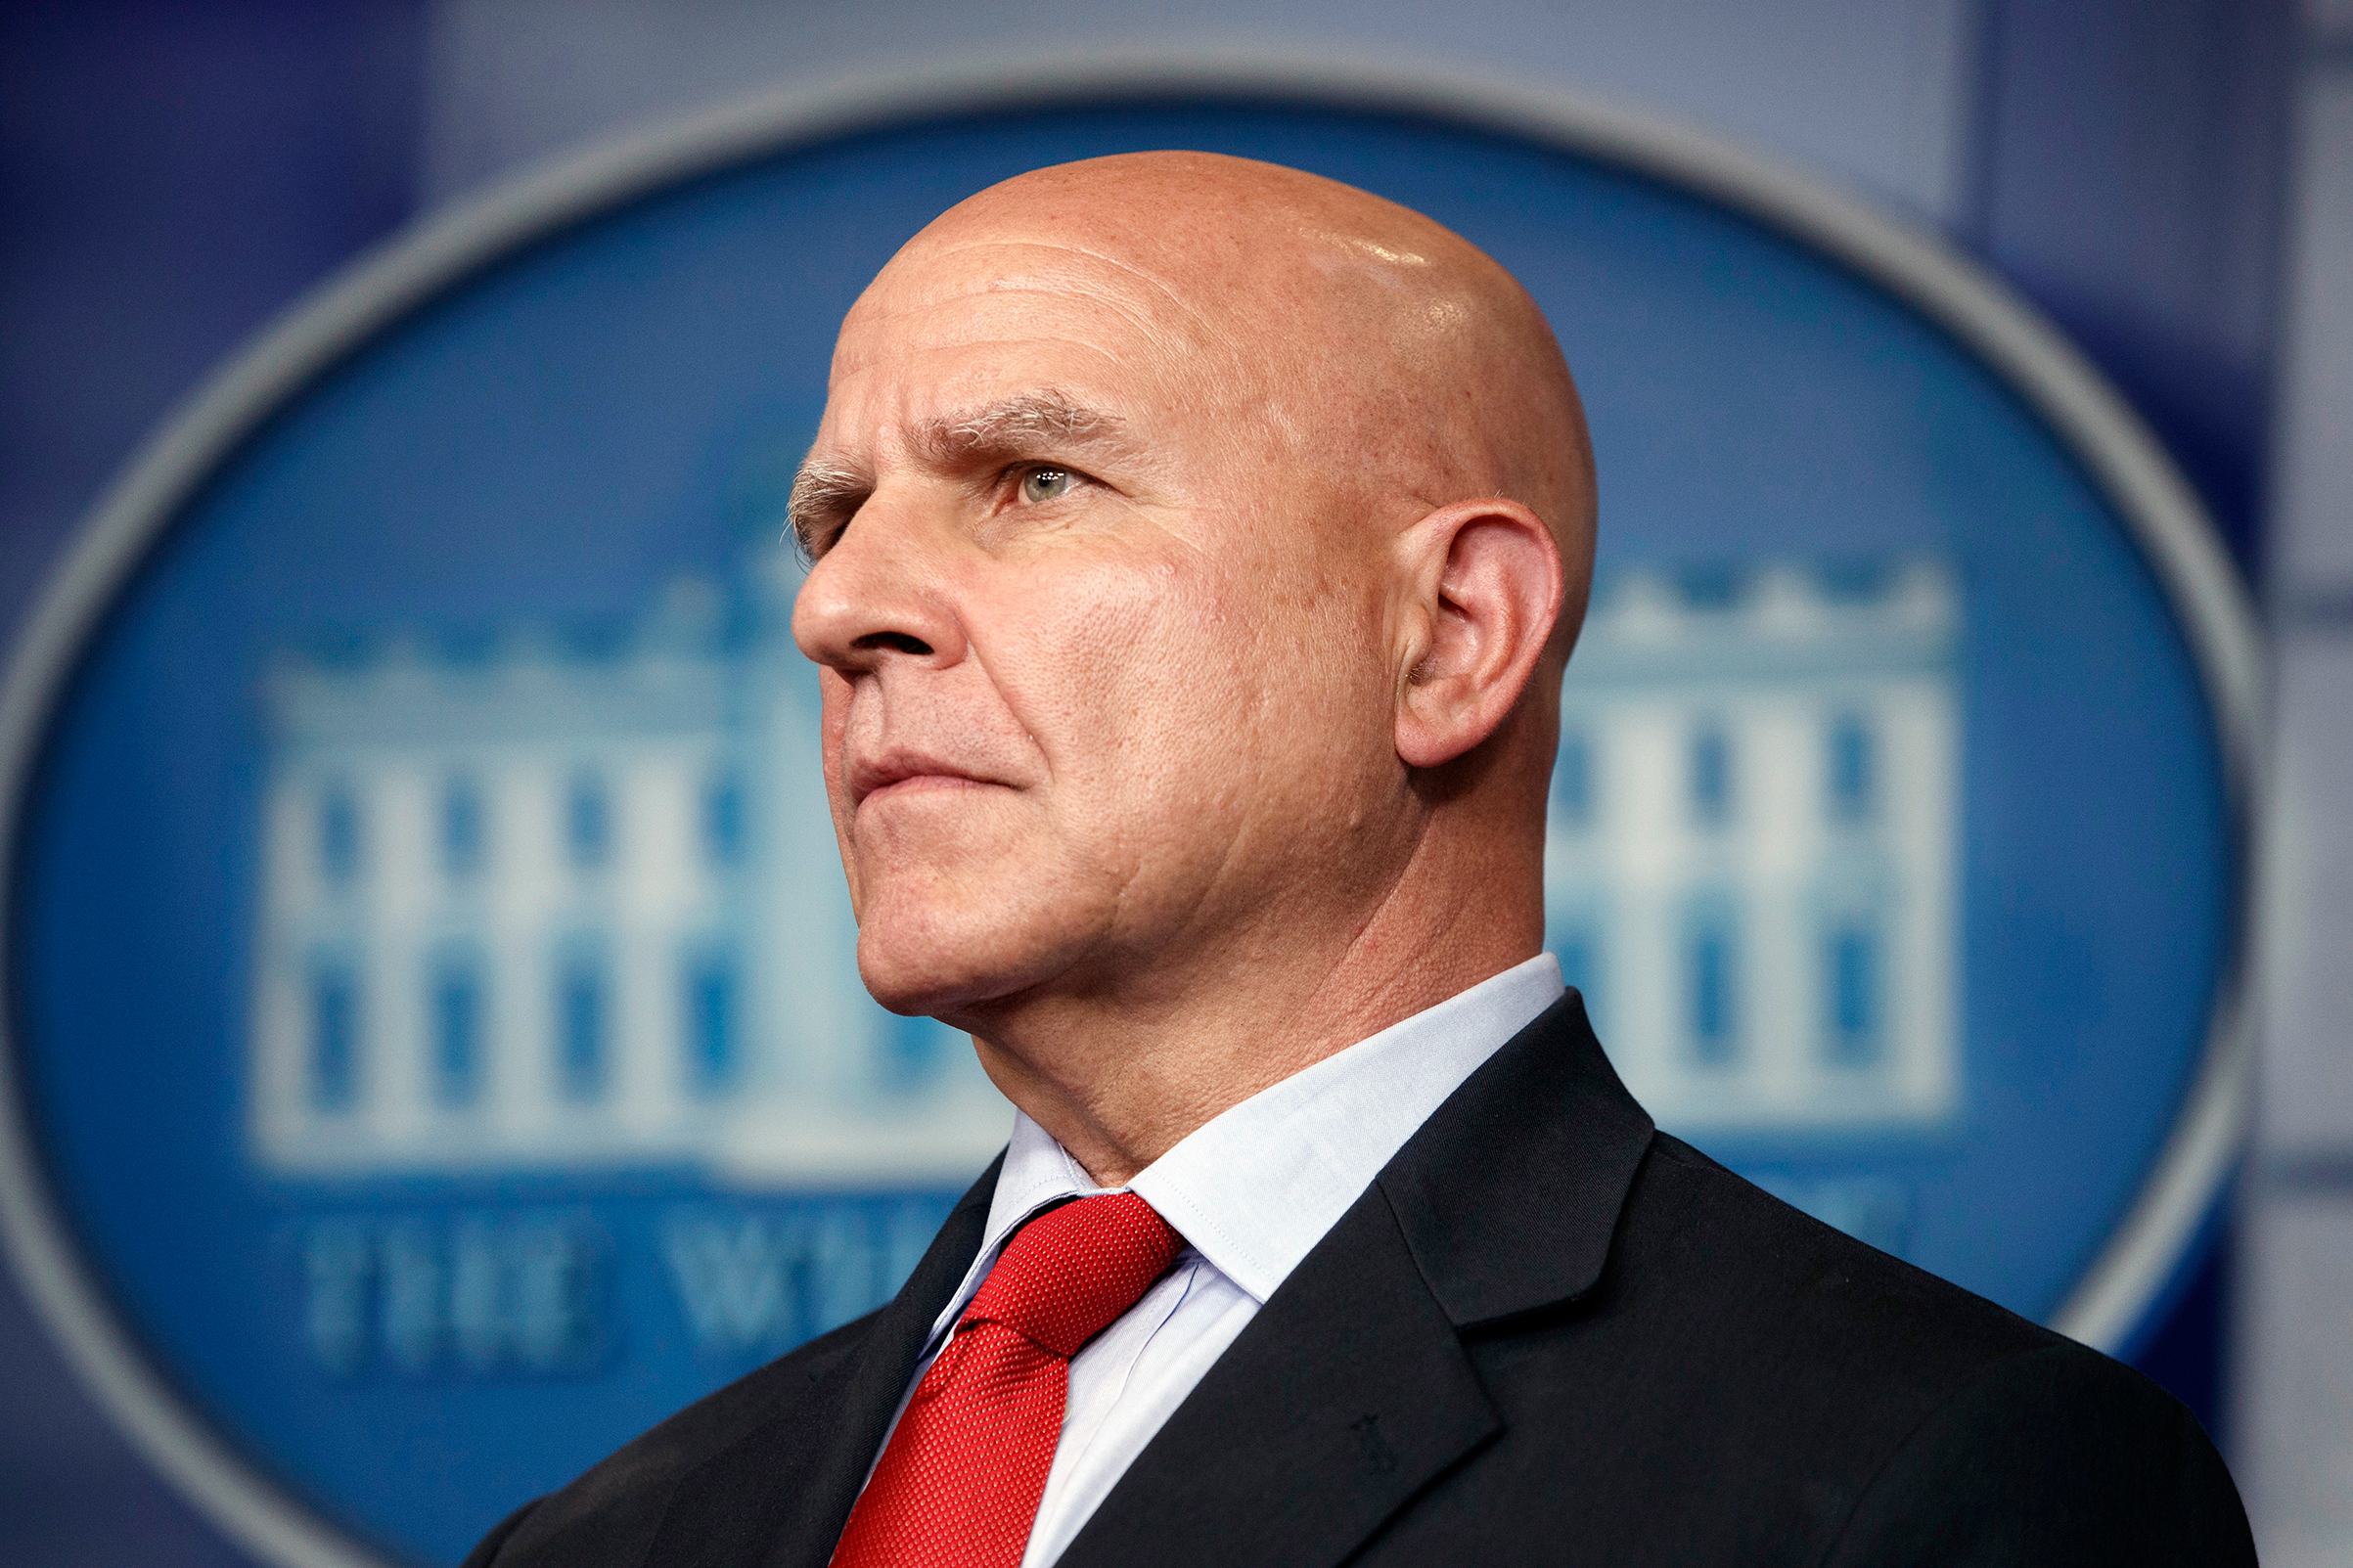 National security adviser H.R. McMaster listens during the daily press briefing at the White House, July 31, 2017, in Washington. (Evan Vucci—AP)